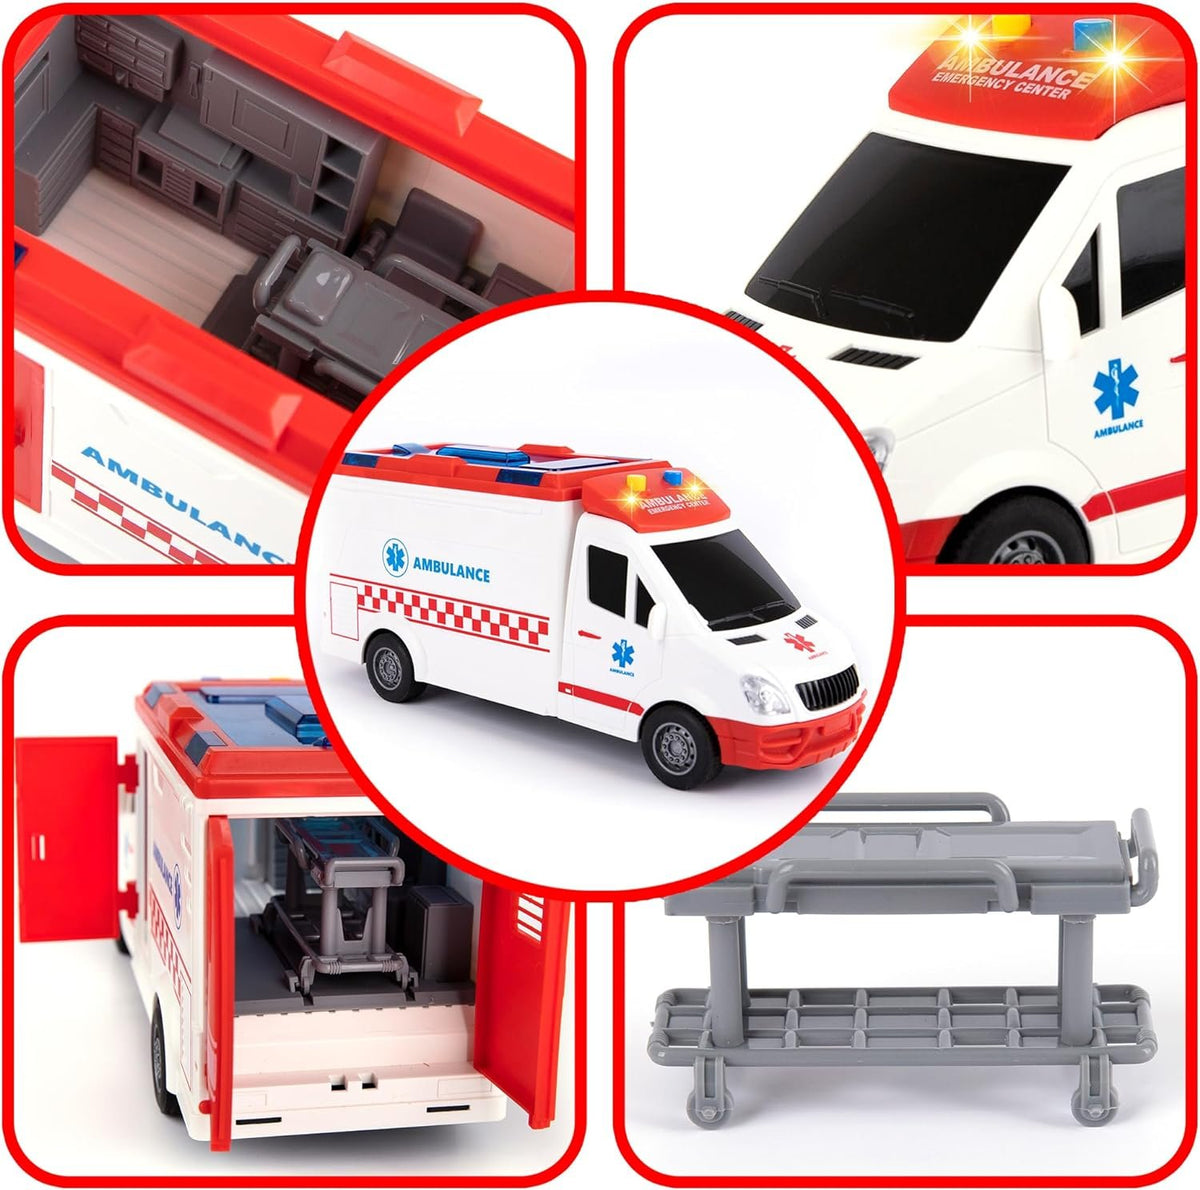 Ambulance Toy Truck for Kids Lights & Siren, Friction-Powered 1/16 Scale Rescue Toy